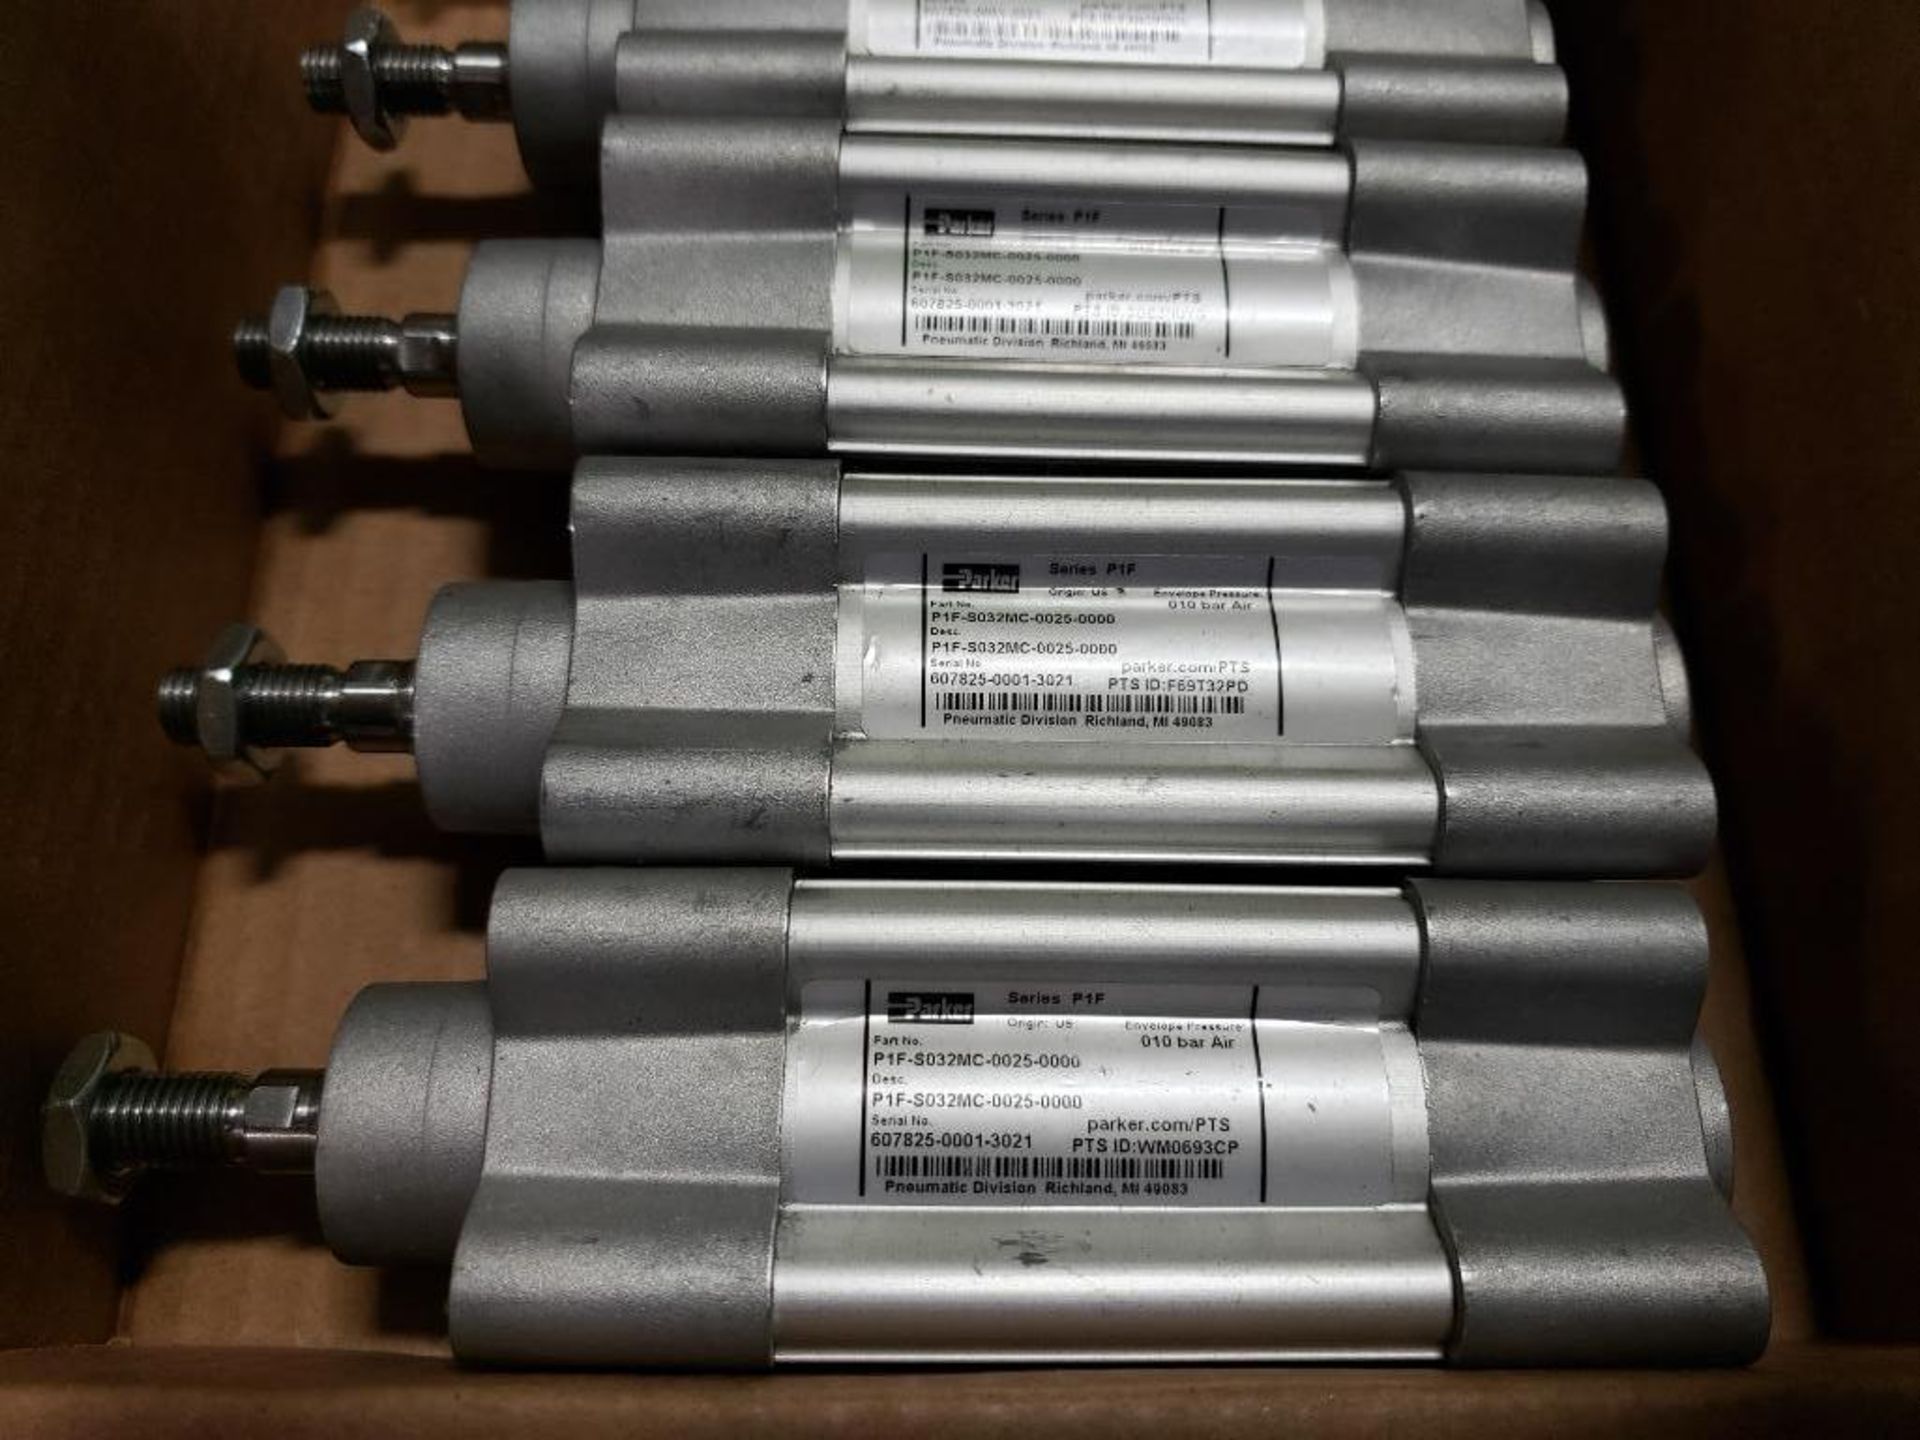 Qty 6 - Parker P1F-S032MC-0025-0000 pneumatic cylinder. - Image 2 of 4